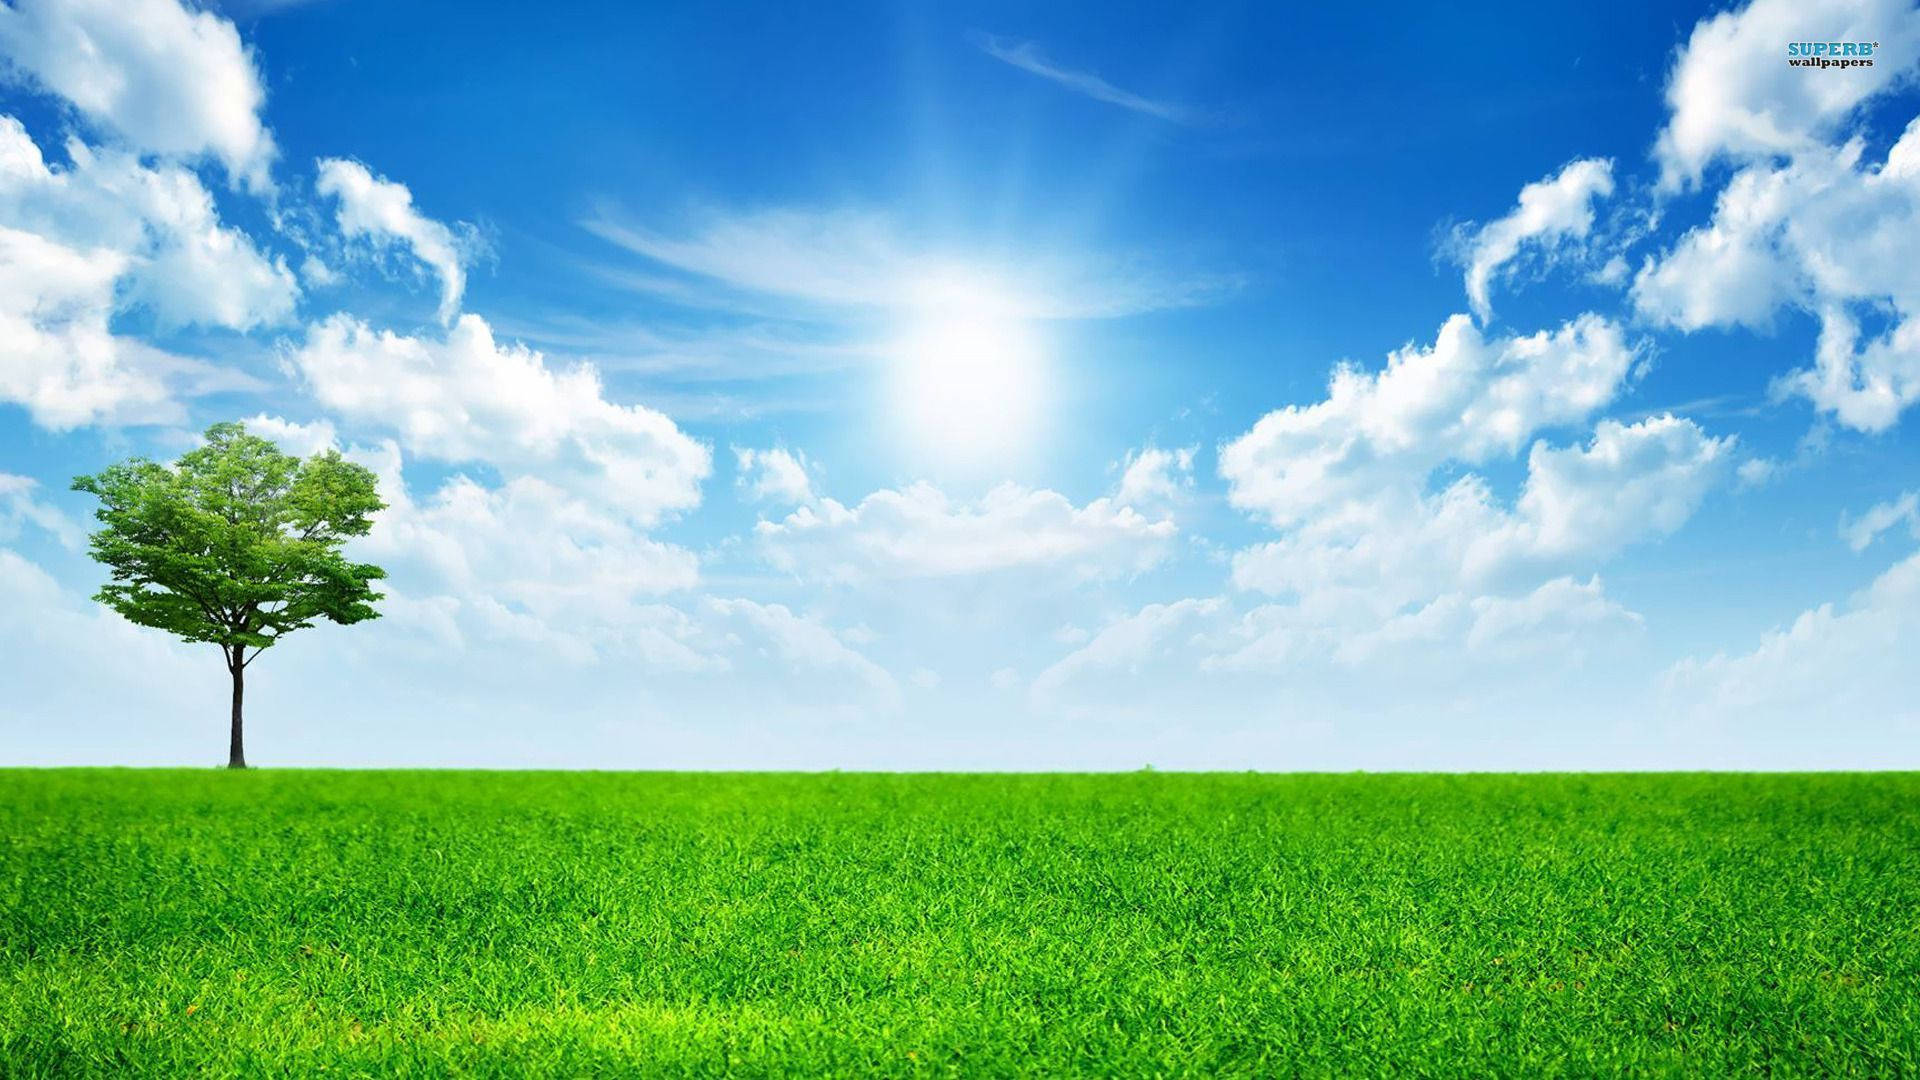 A Green Field With A Tree And Blue Sky Background